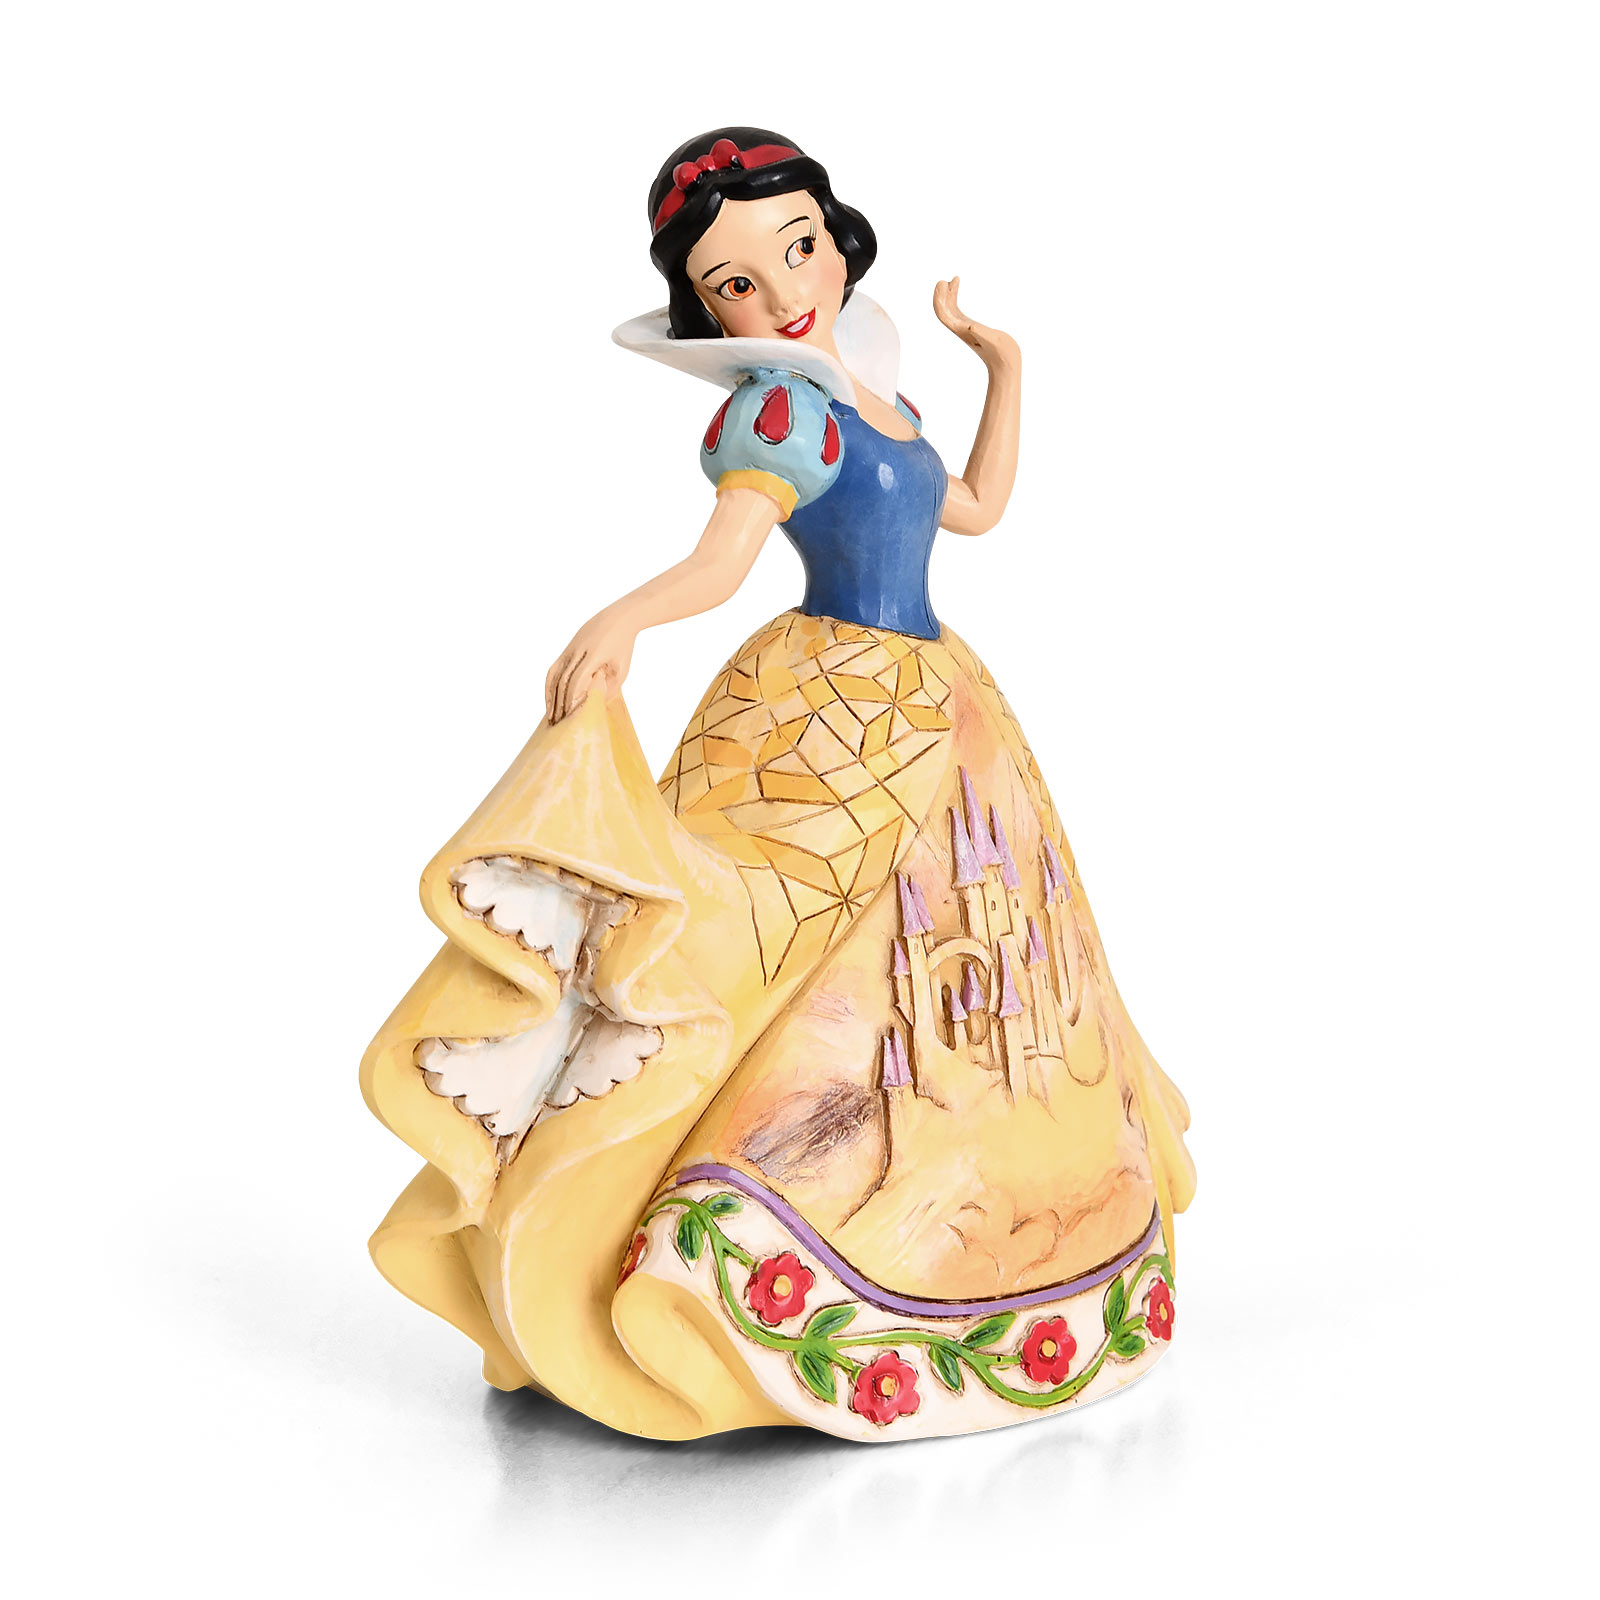 Blanche-Neige - Castle in the Clouds Figurine